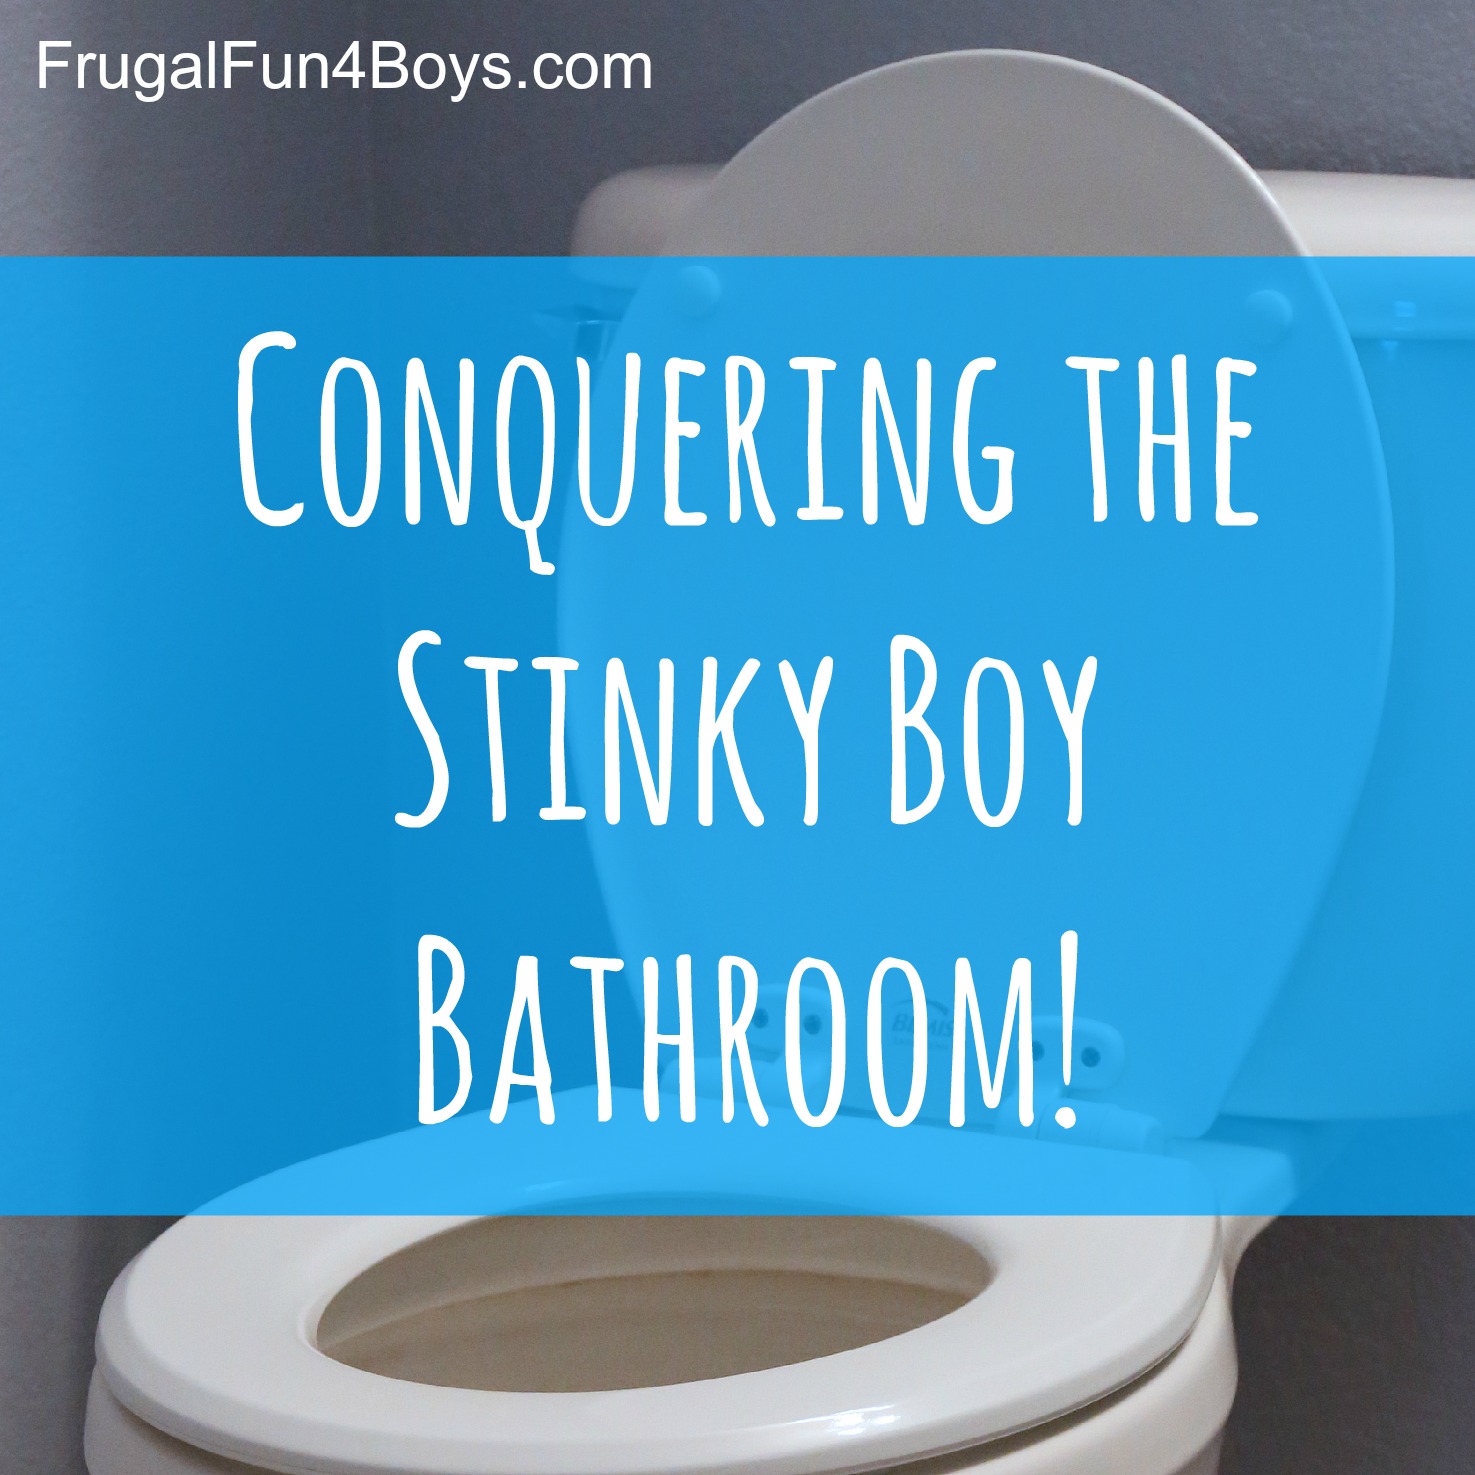 Conquering the Stinky Boy Bathroom - Ideas for getting rid of the lingering pee smell!